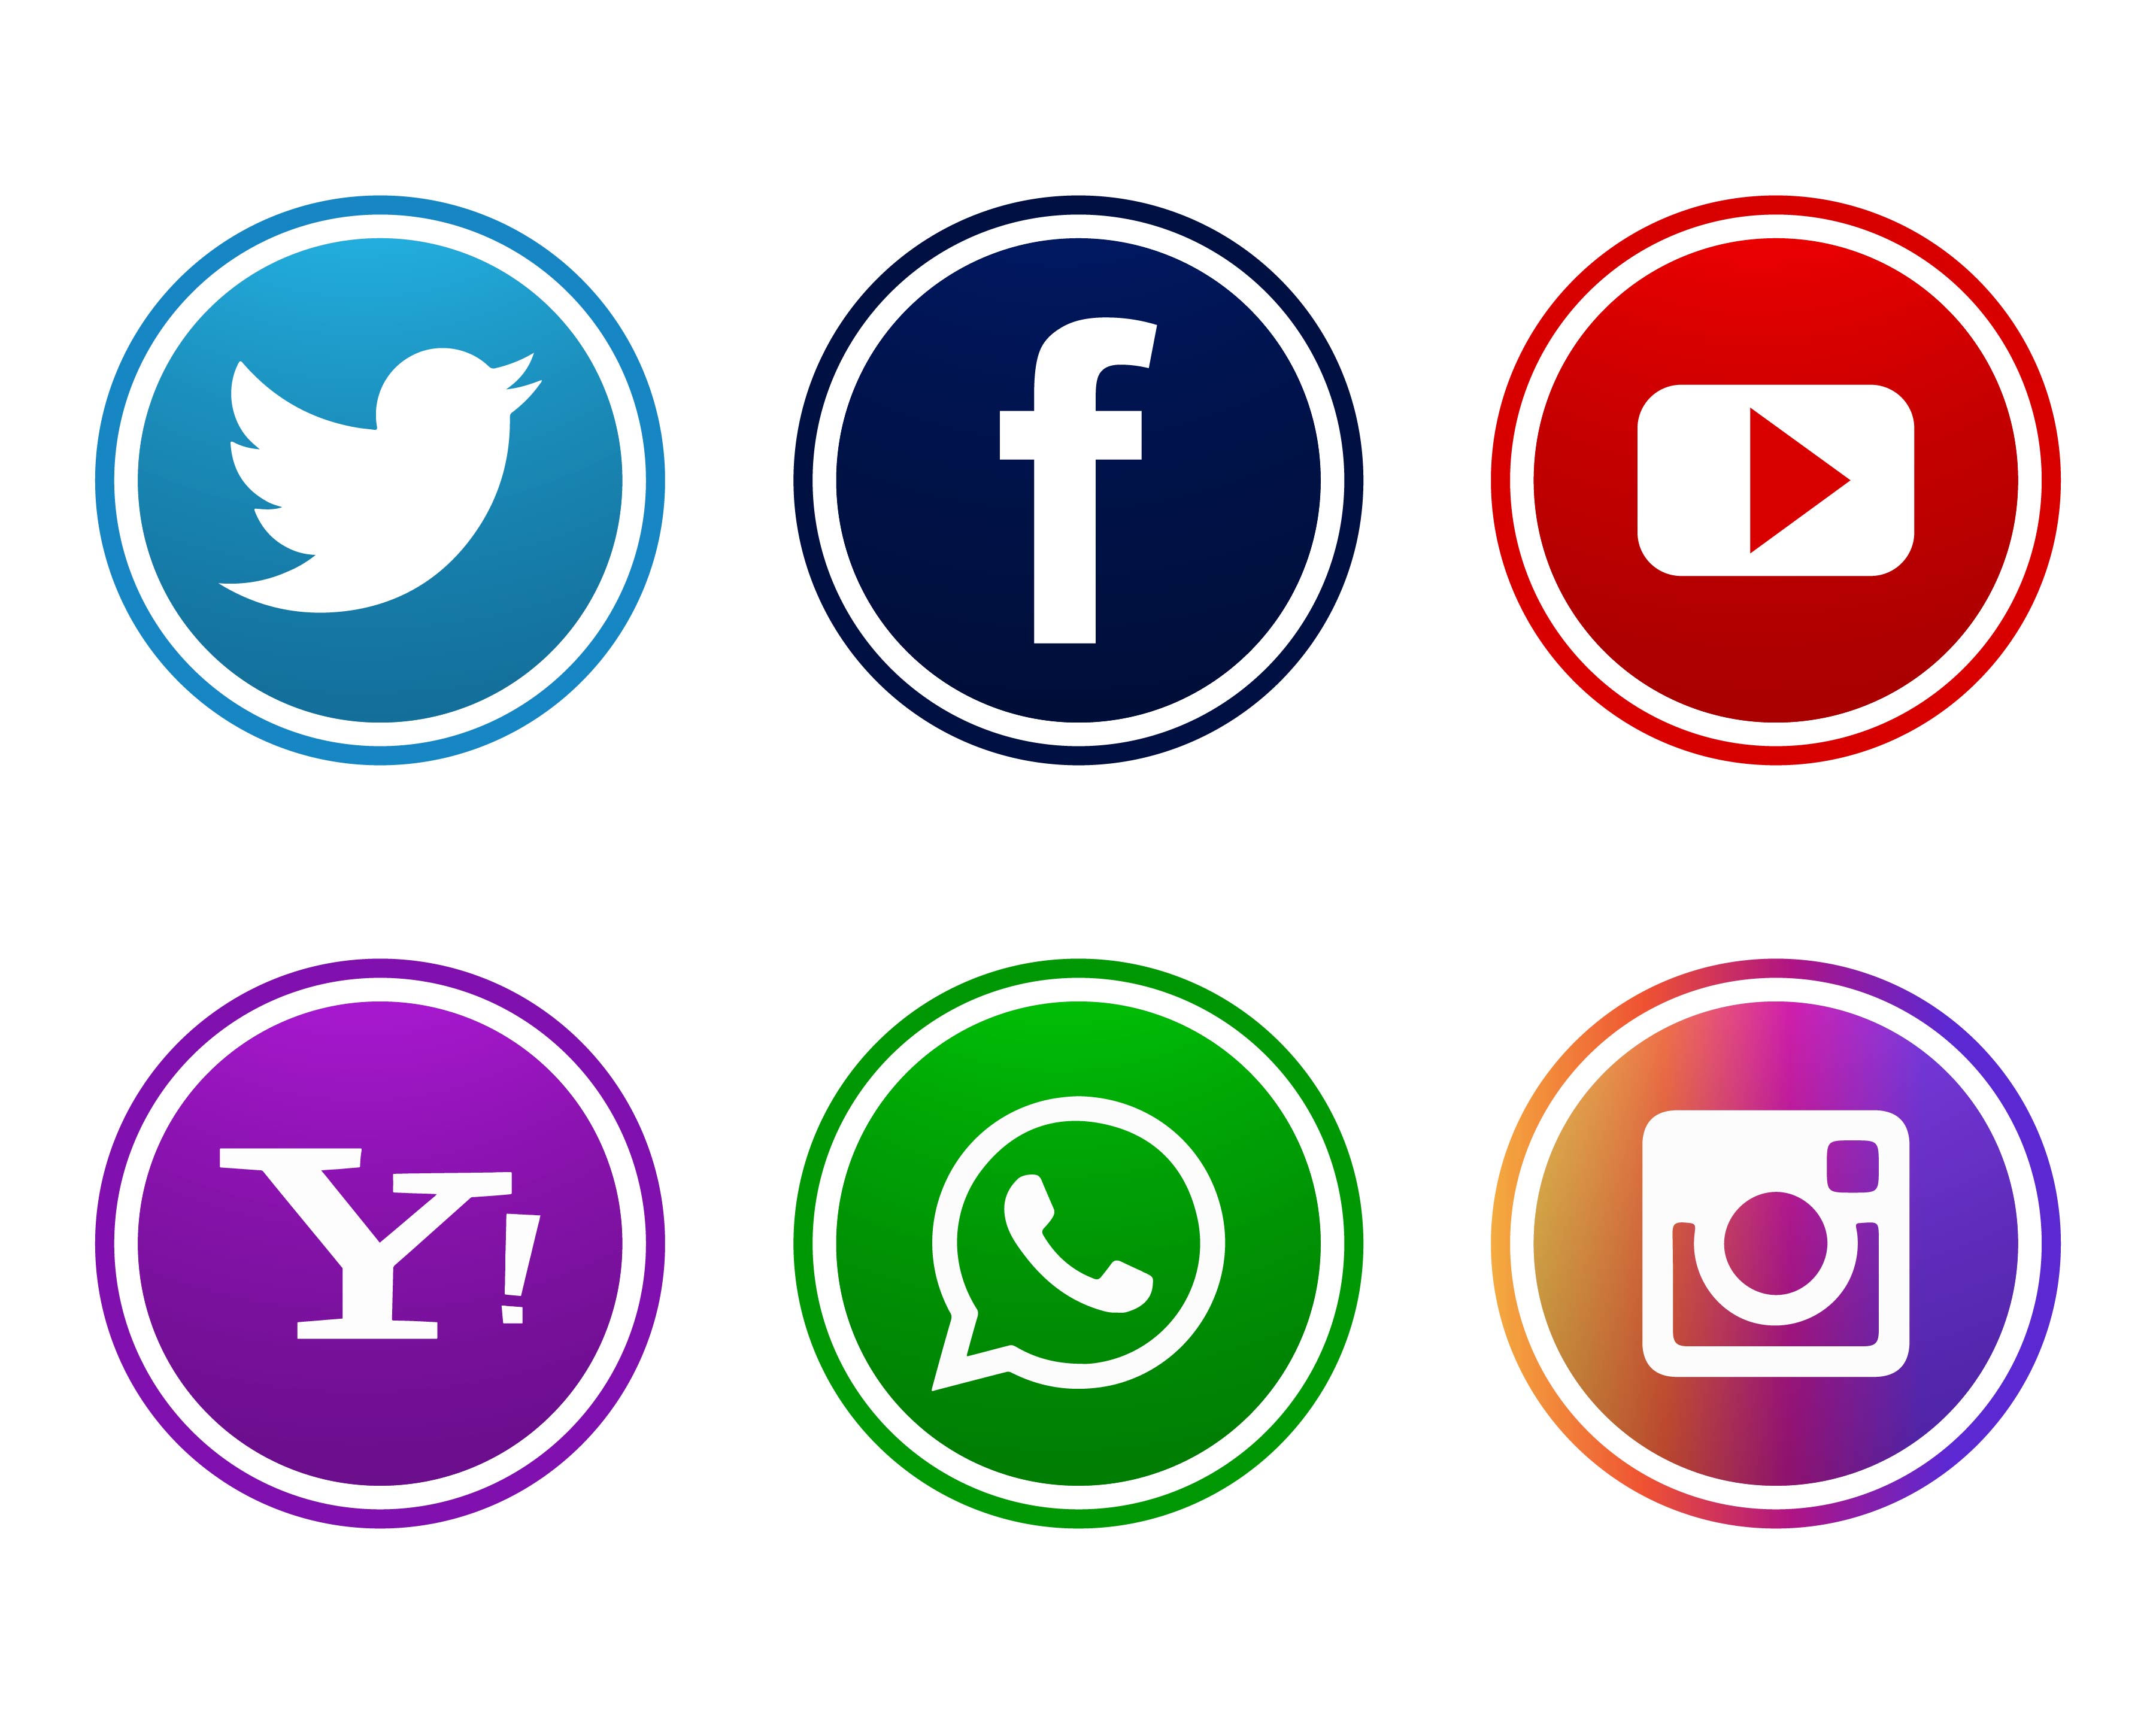 Social icons svg download - deluxejnr